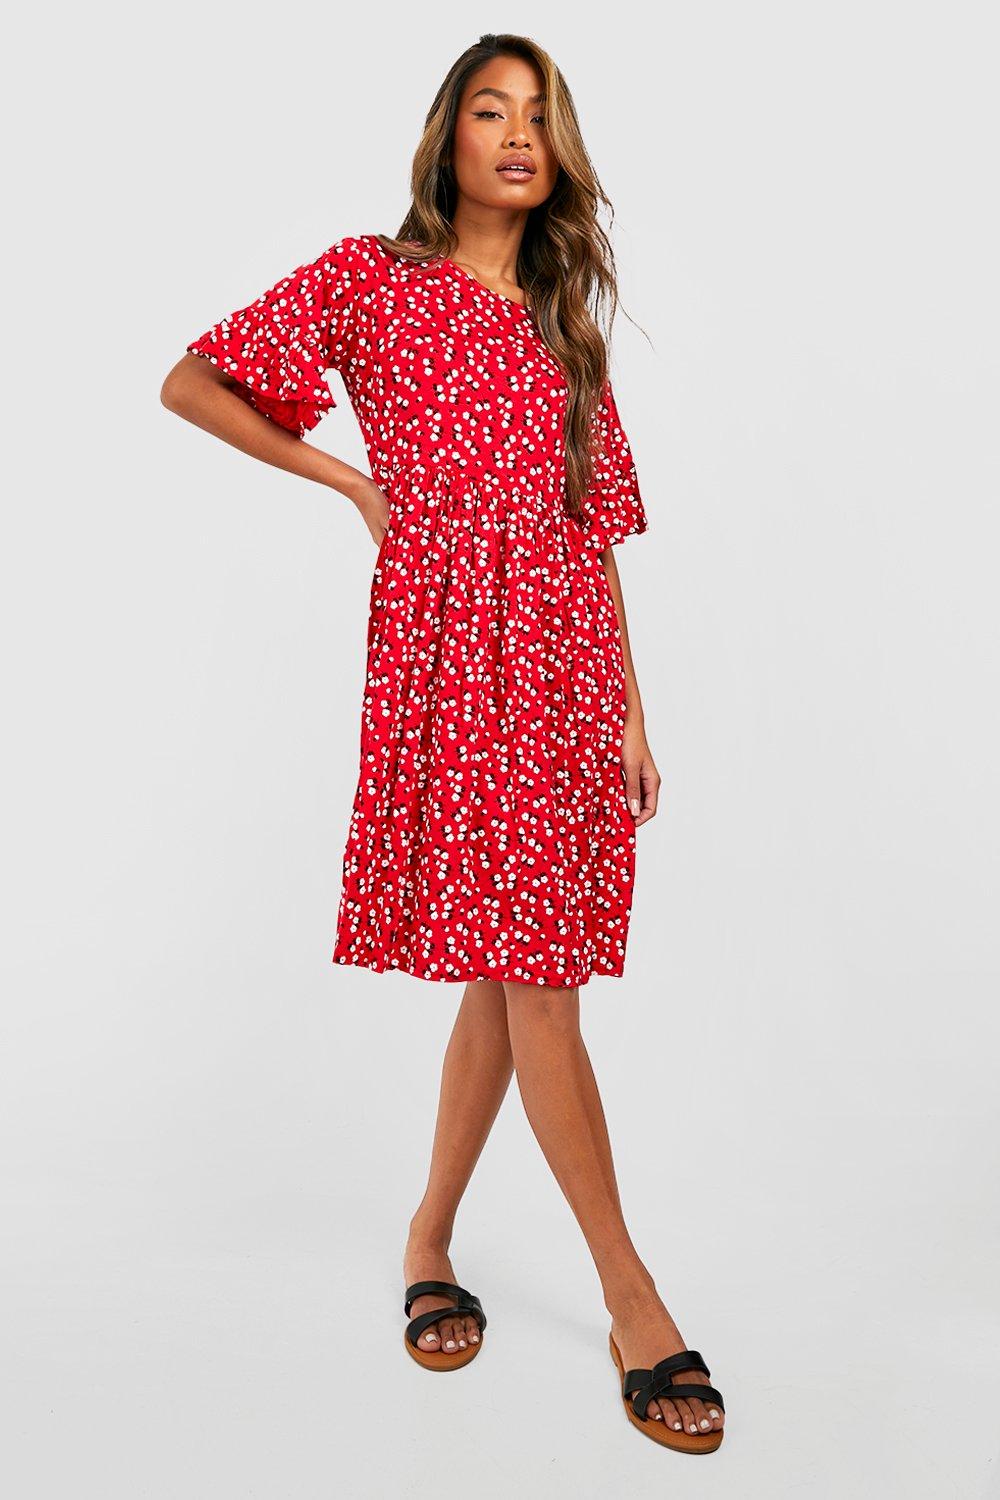 boohoo red floral dress